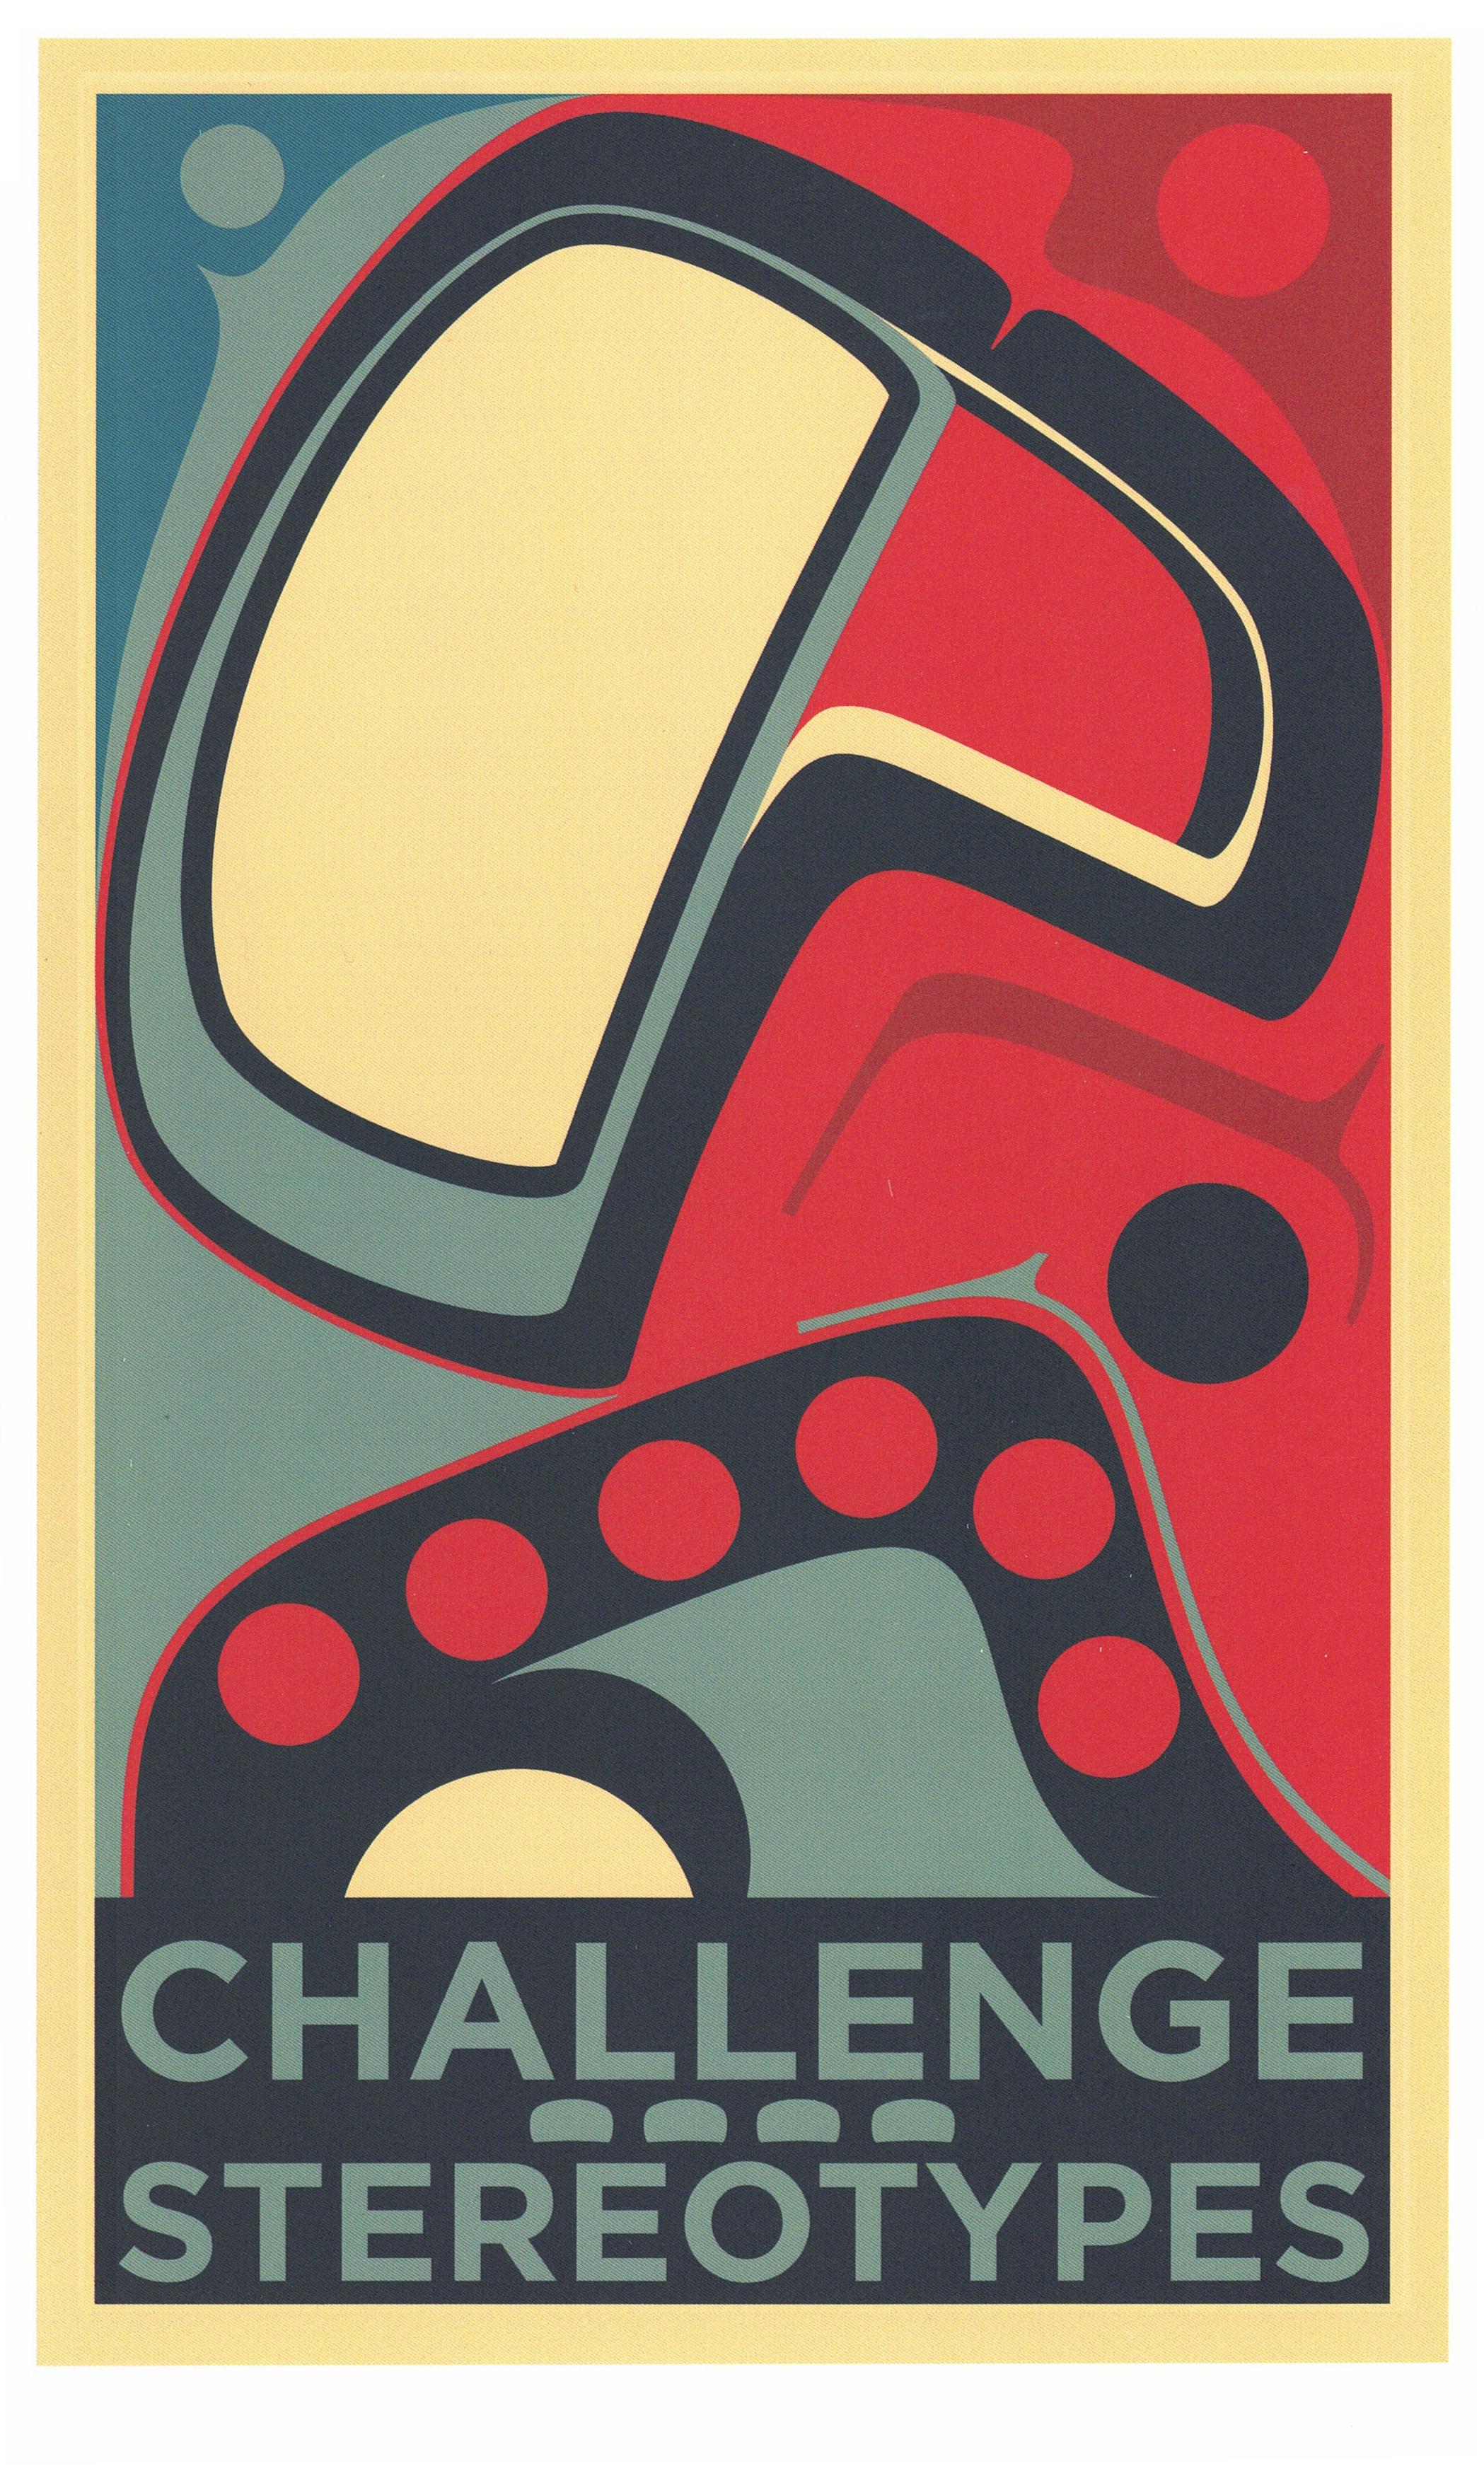 Sonny Assu Abstract Print - There is Hope, If We Rise (Challenge Stereotypes)